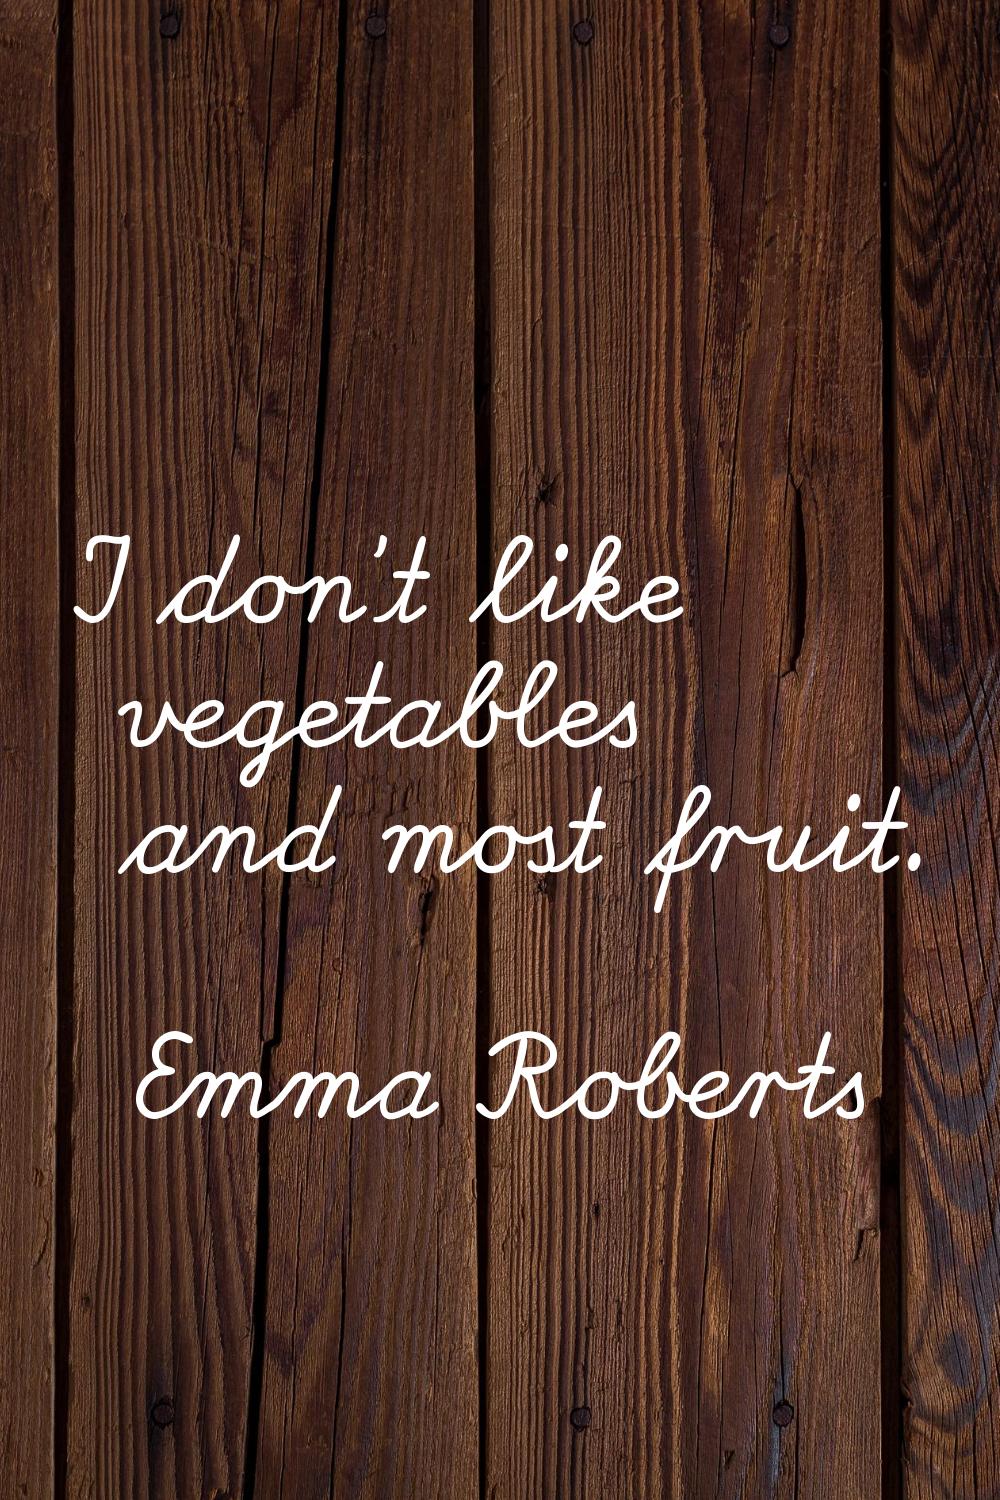 I don't like vegetables and most fruit.